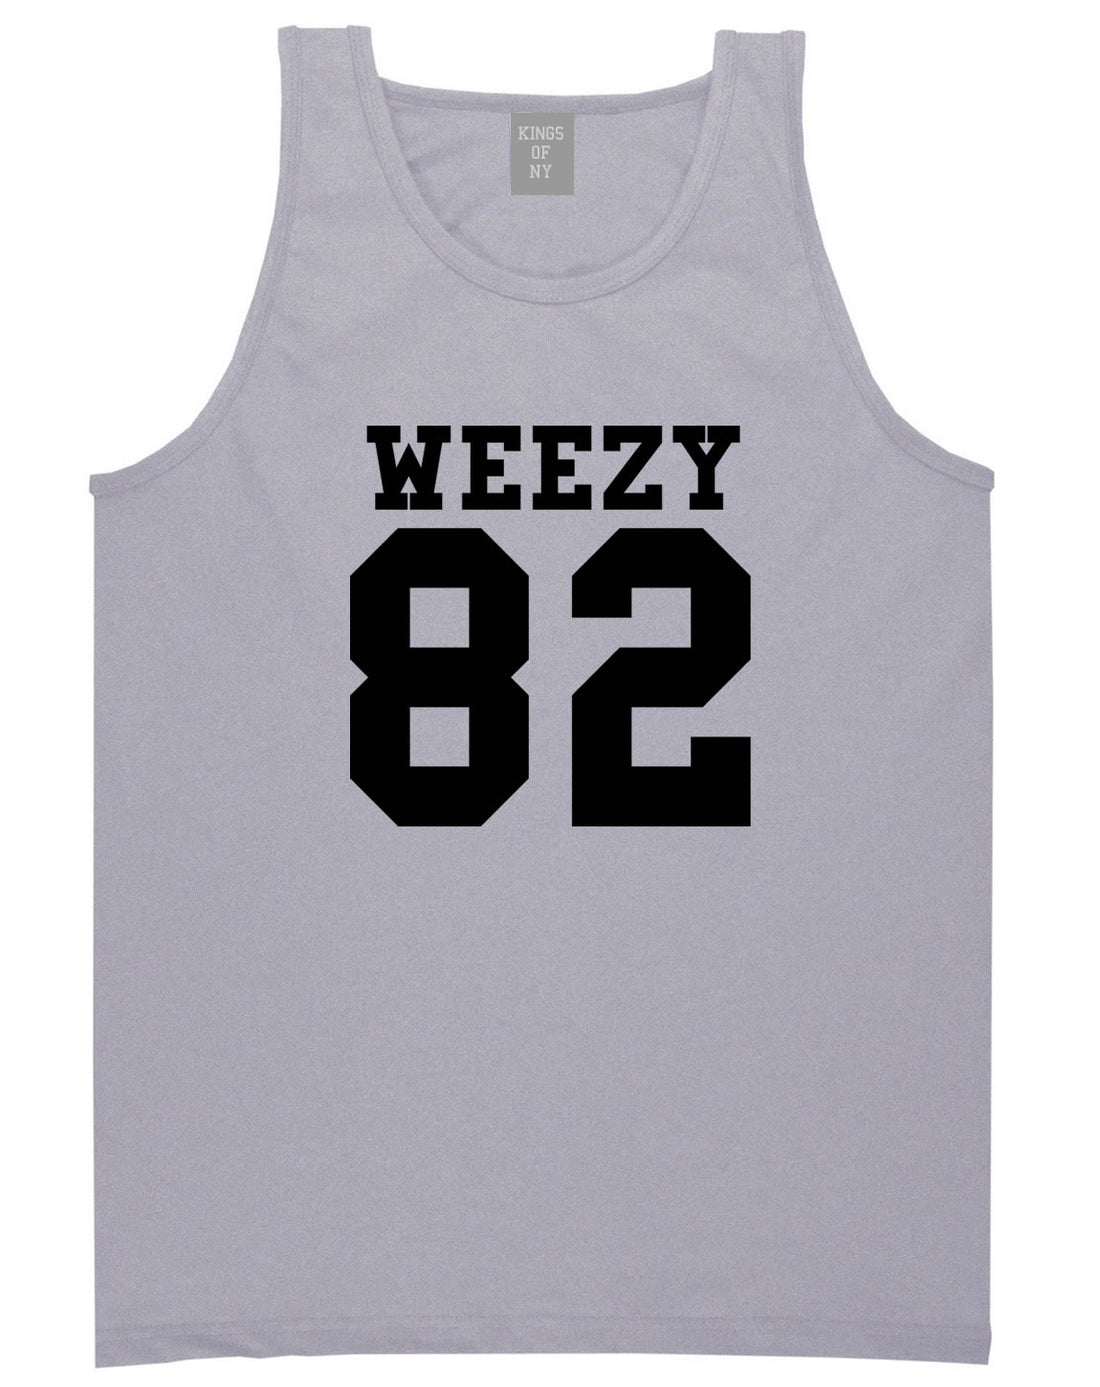 Weezy 82 Team Tank Top in Grey by Kings Of NY